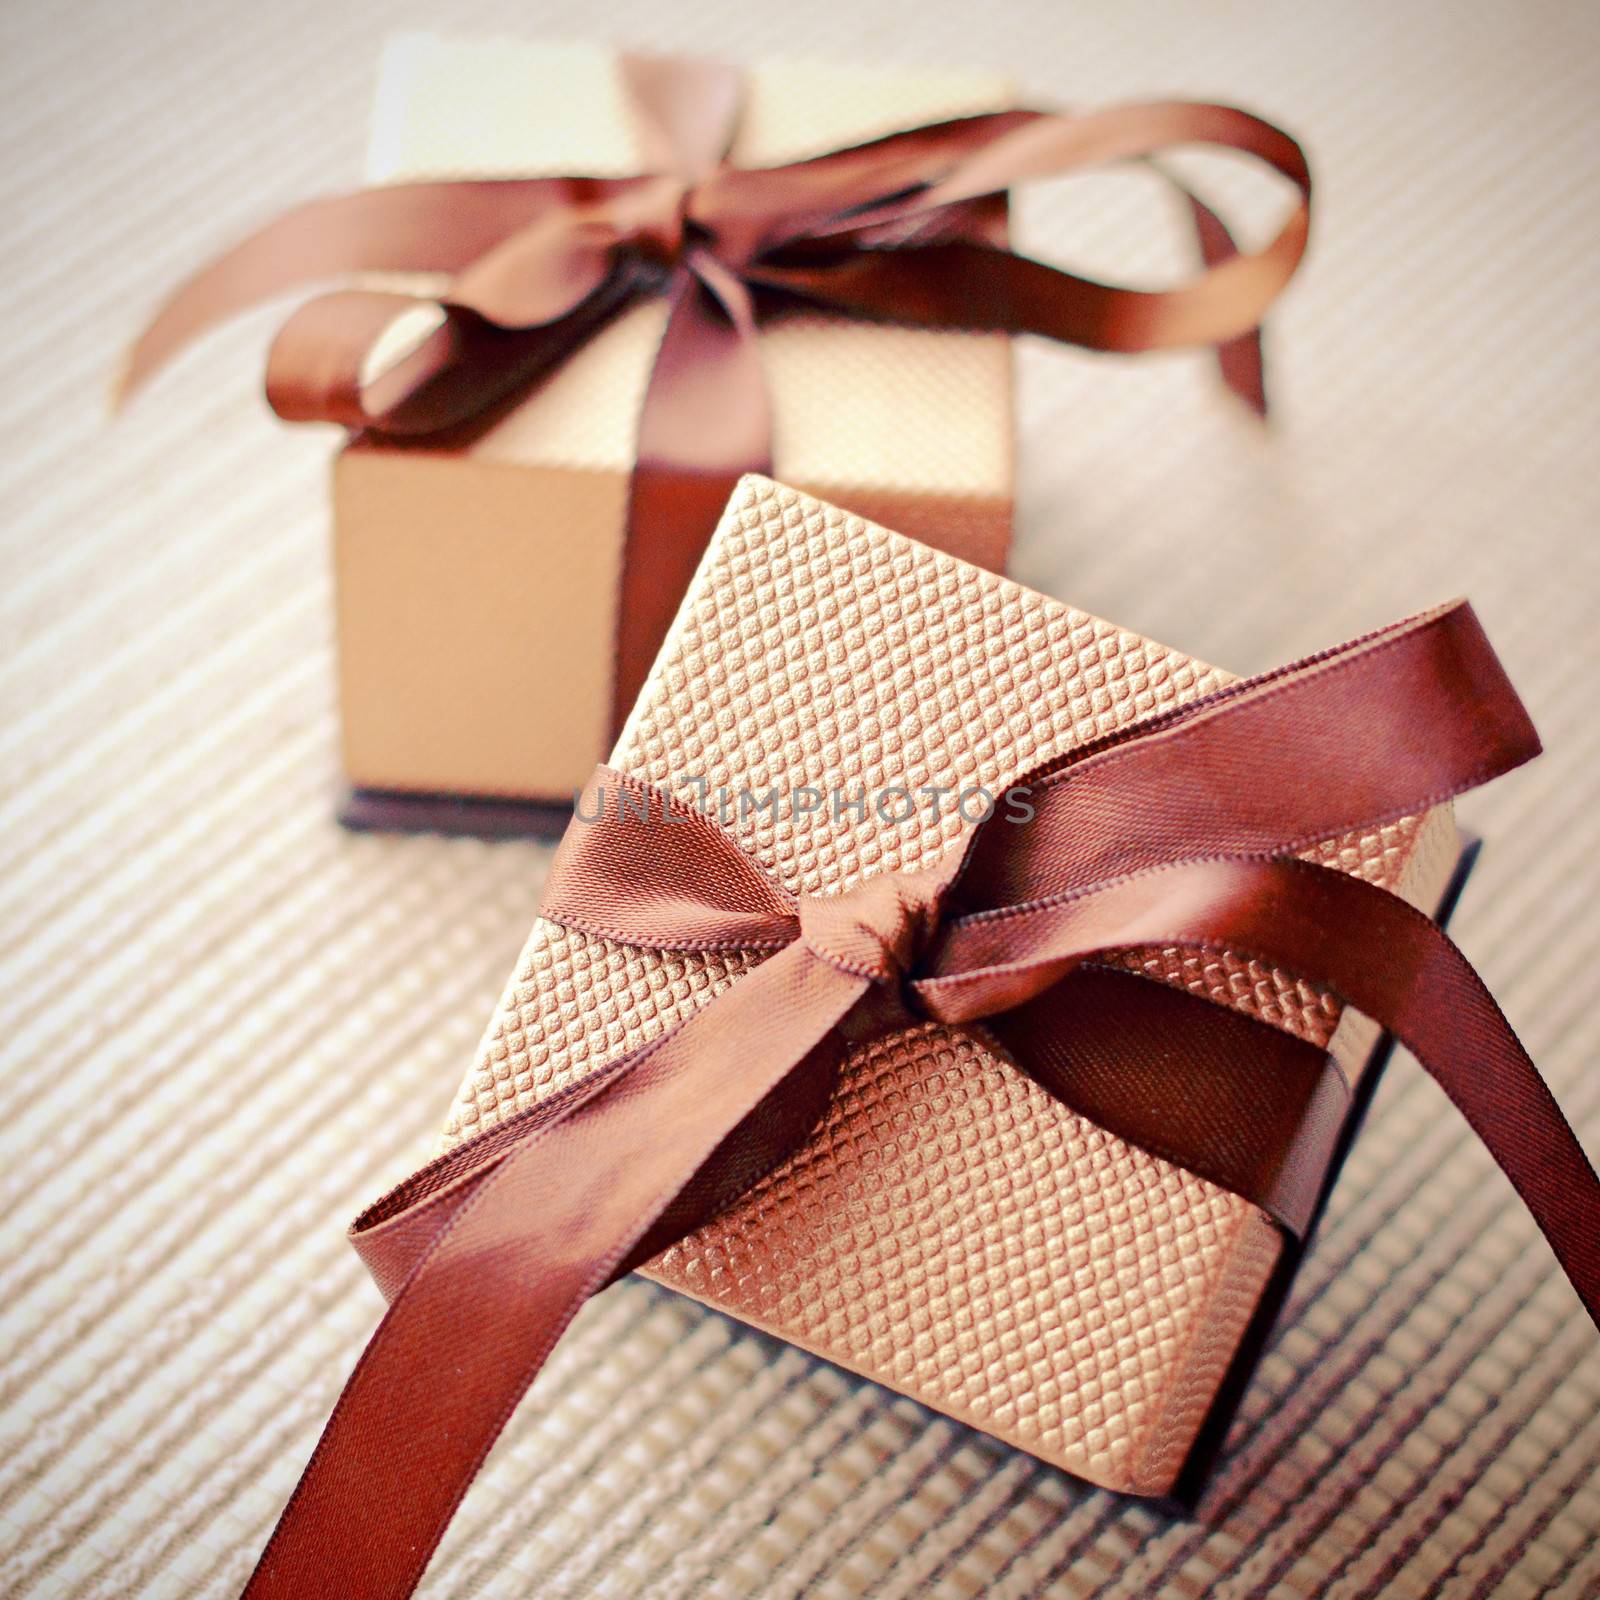 Luxury gift boxes with ribbon, retro filter effect  by nuchylee